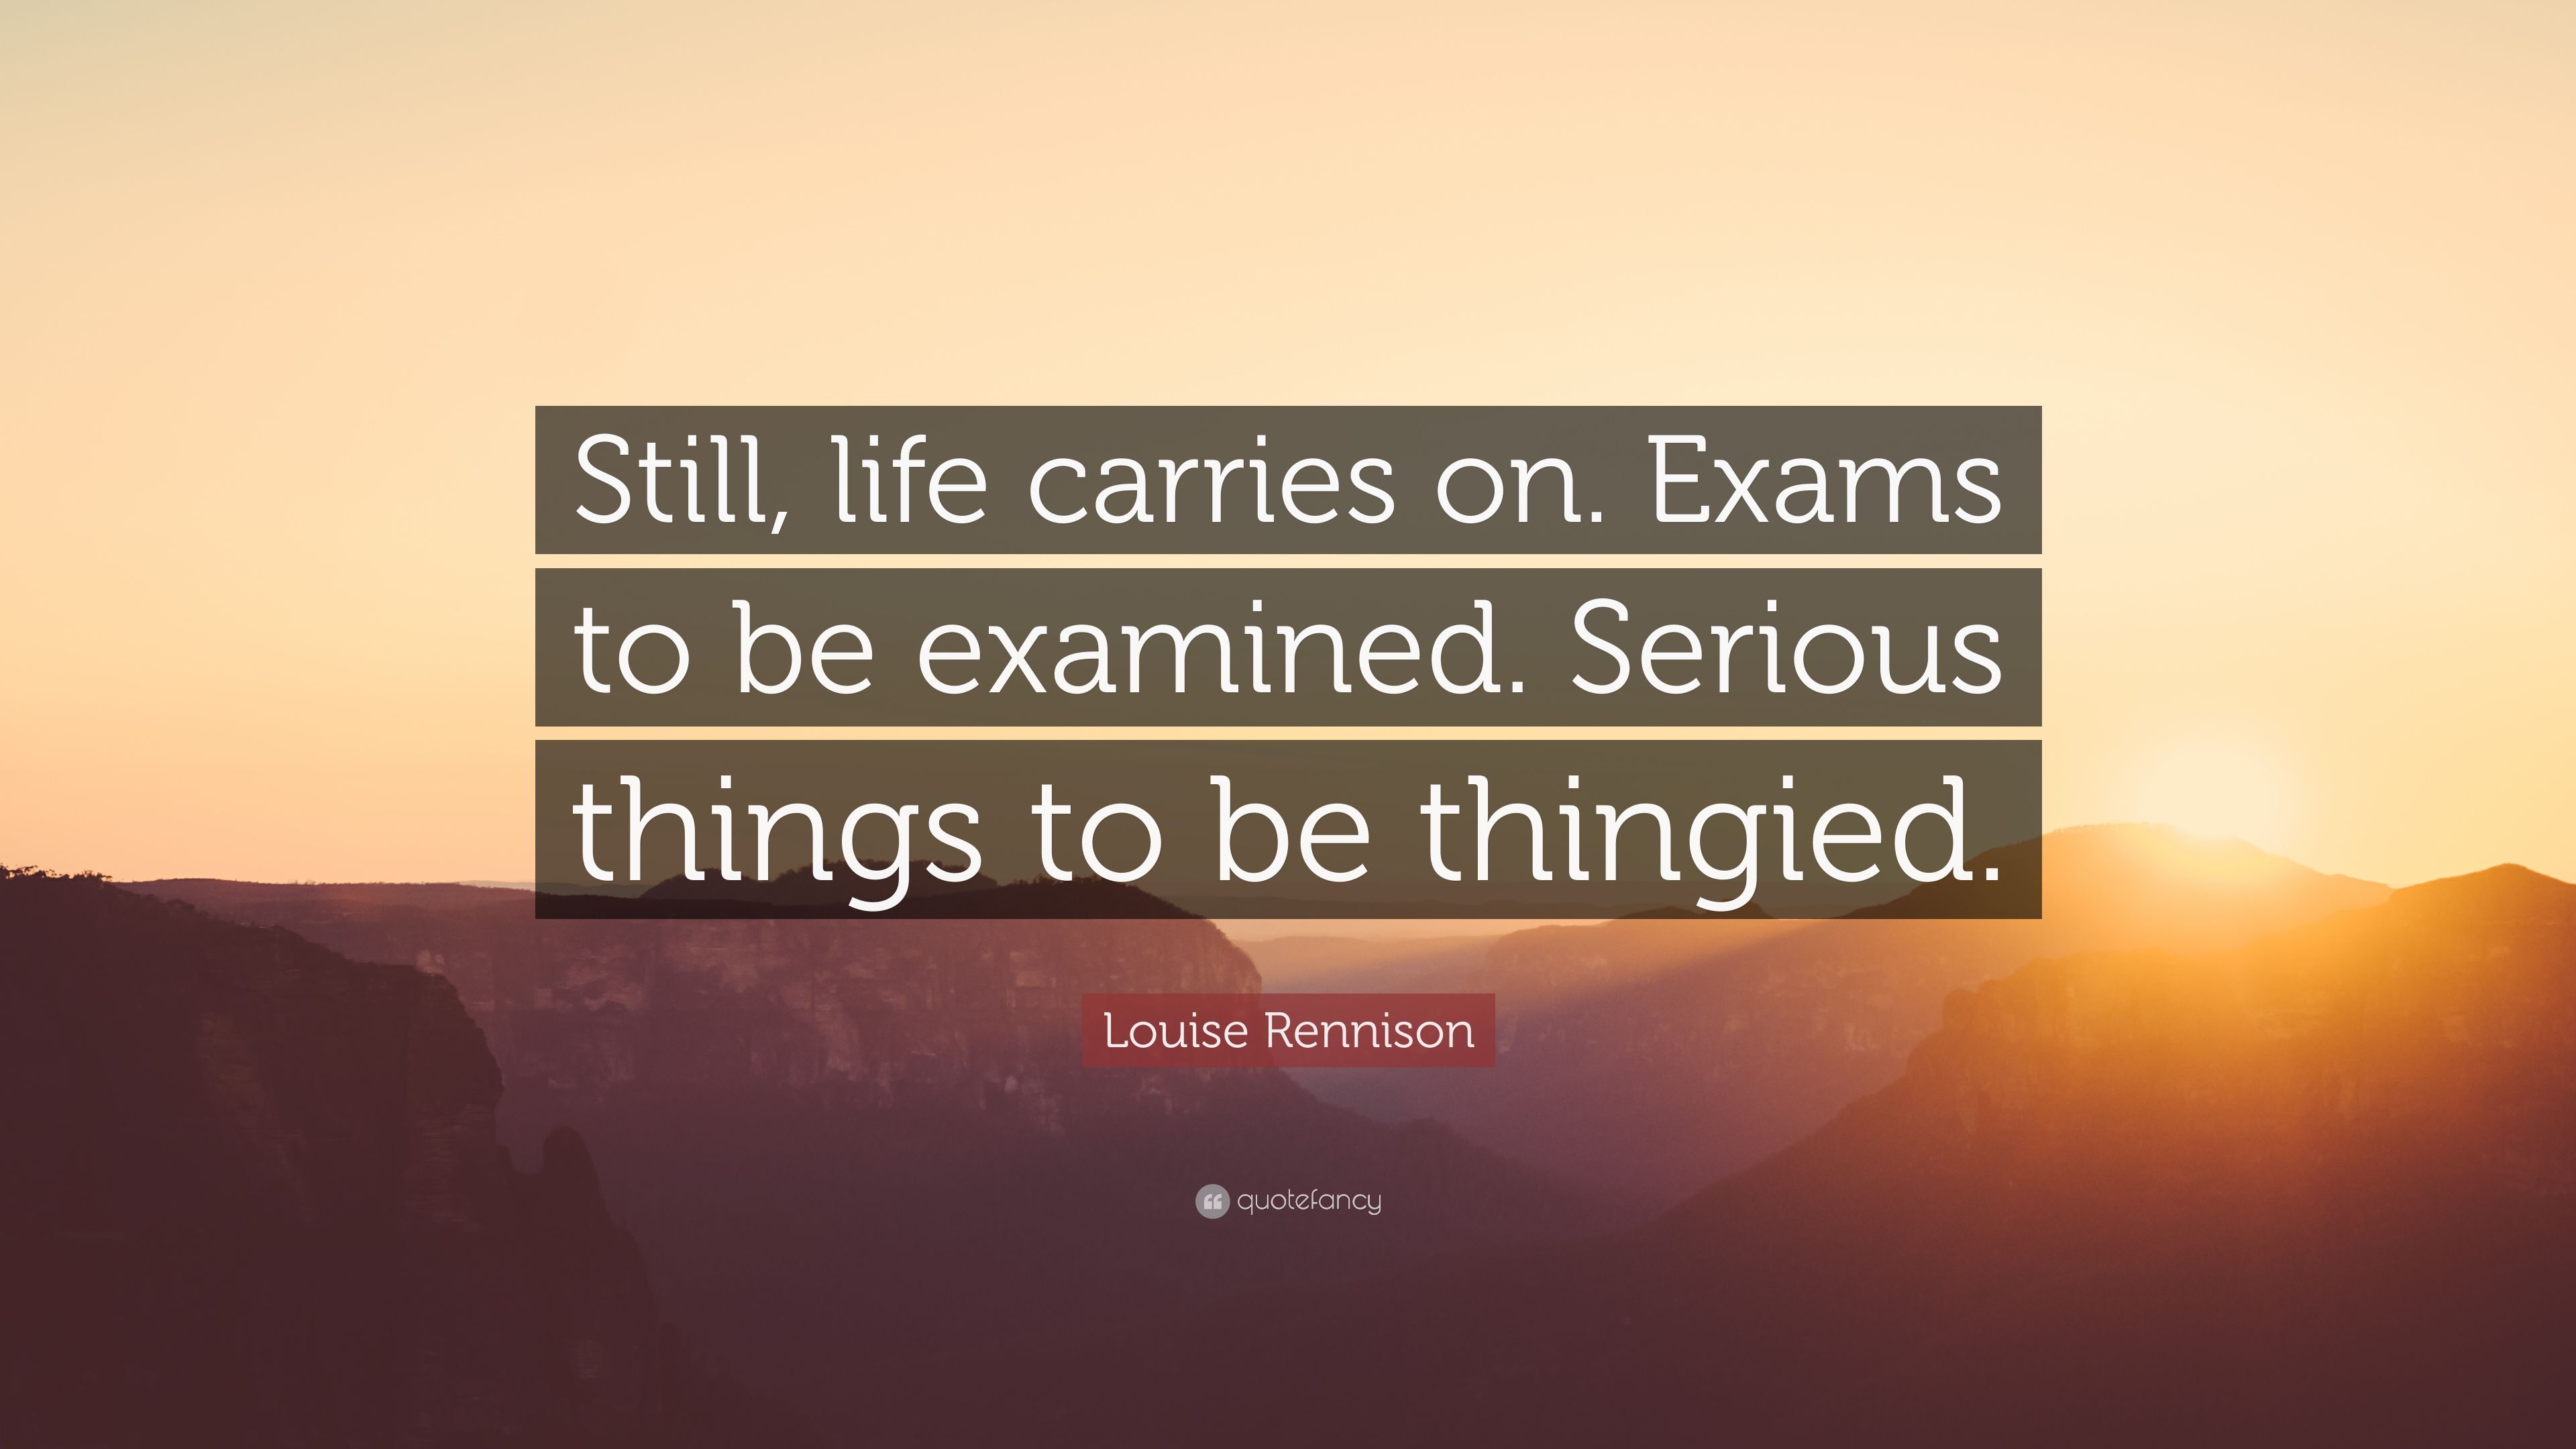 Louise Rennison Quote: “Still, life carries on. Exams to be examined. Serious things to be thingied.” (7 wallpaper)